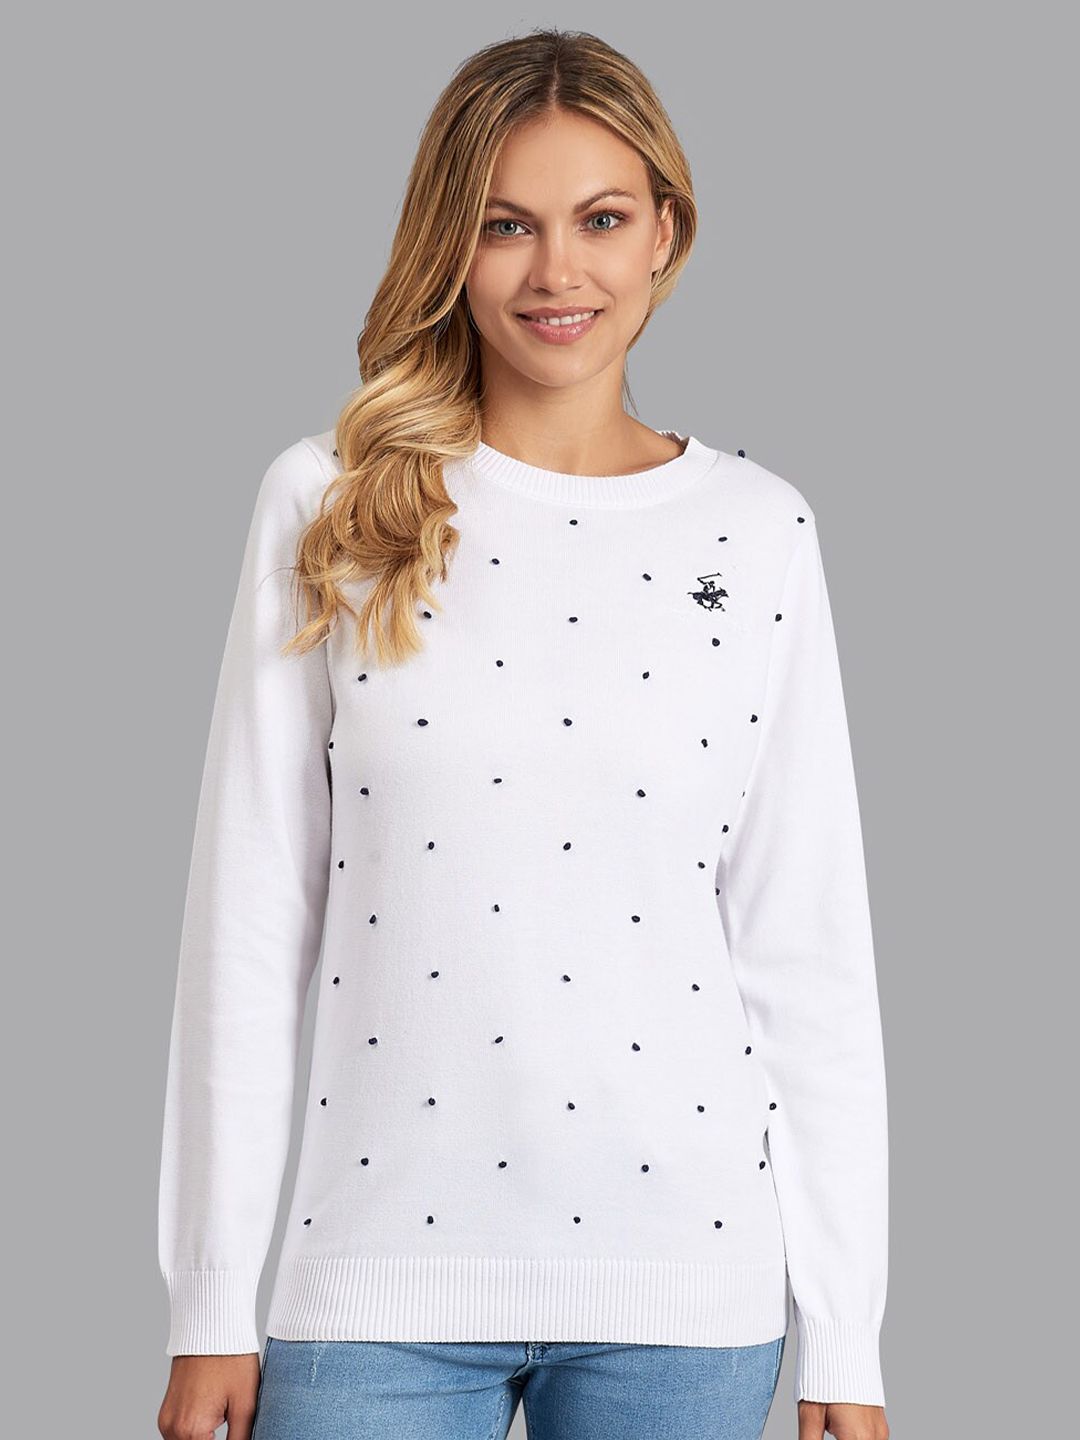 Beverly Hills Polo Club Women White & Navy Blue Embroidered Cotton Pullover Price in India